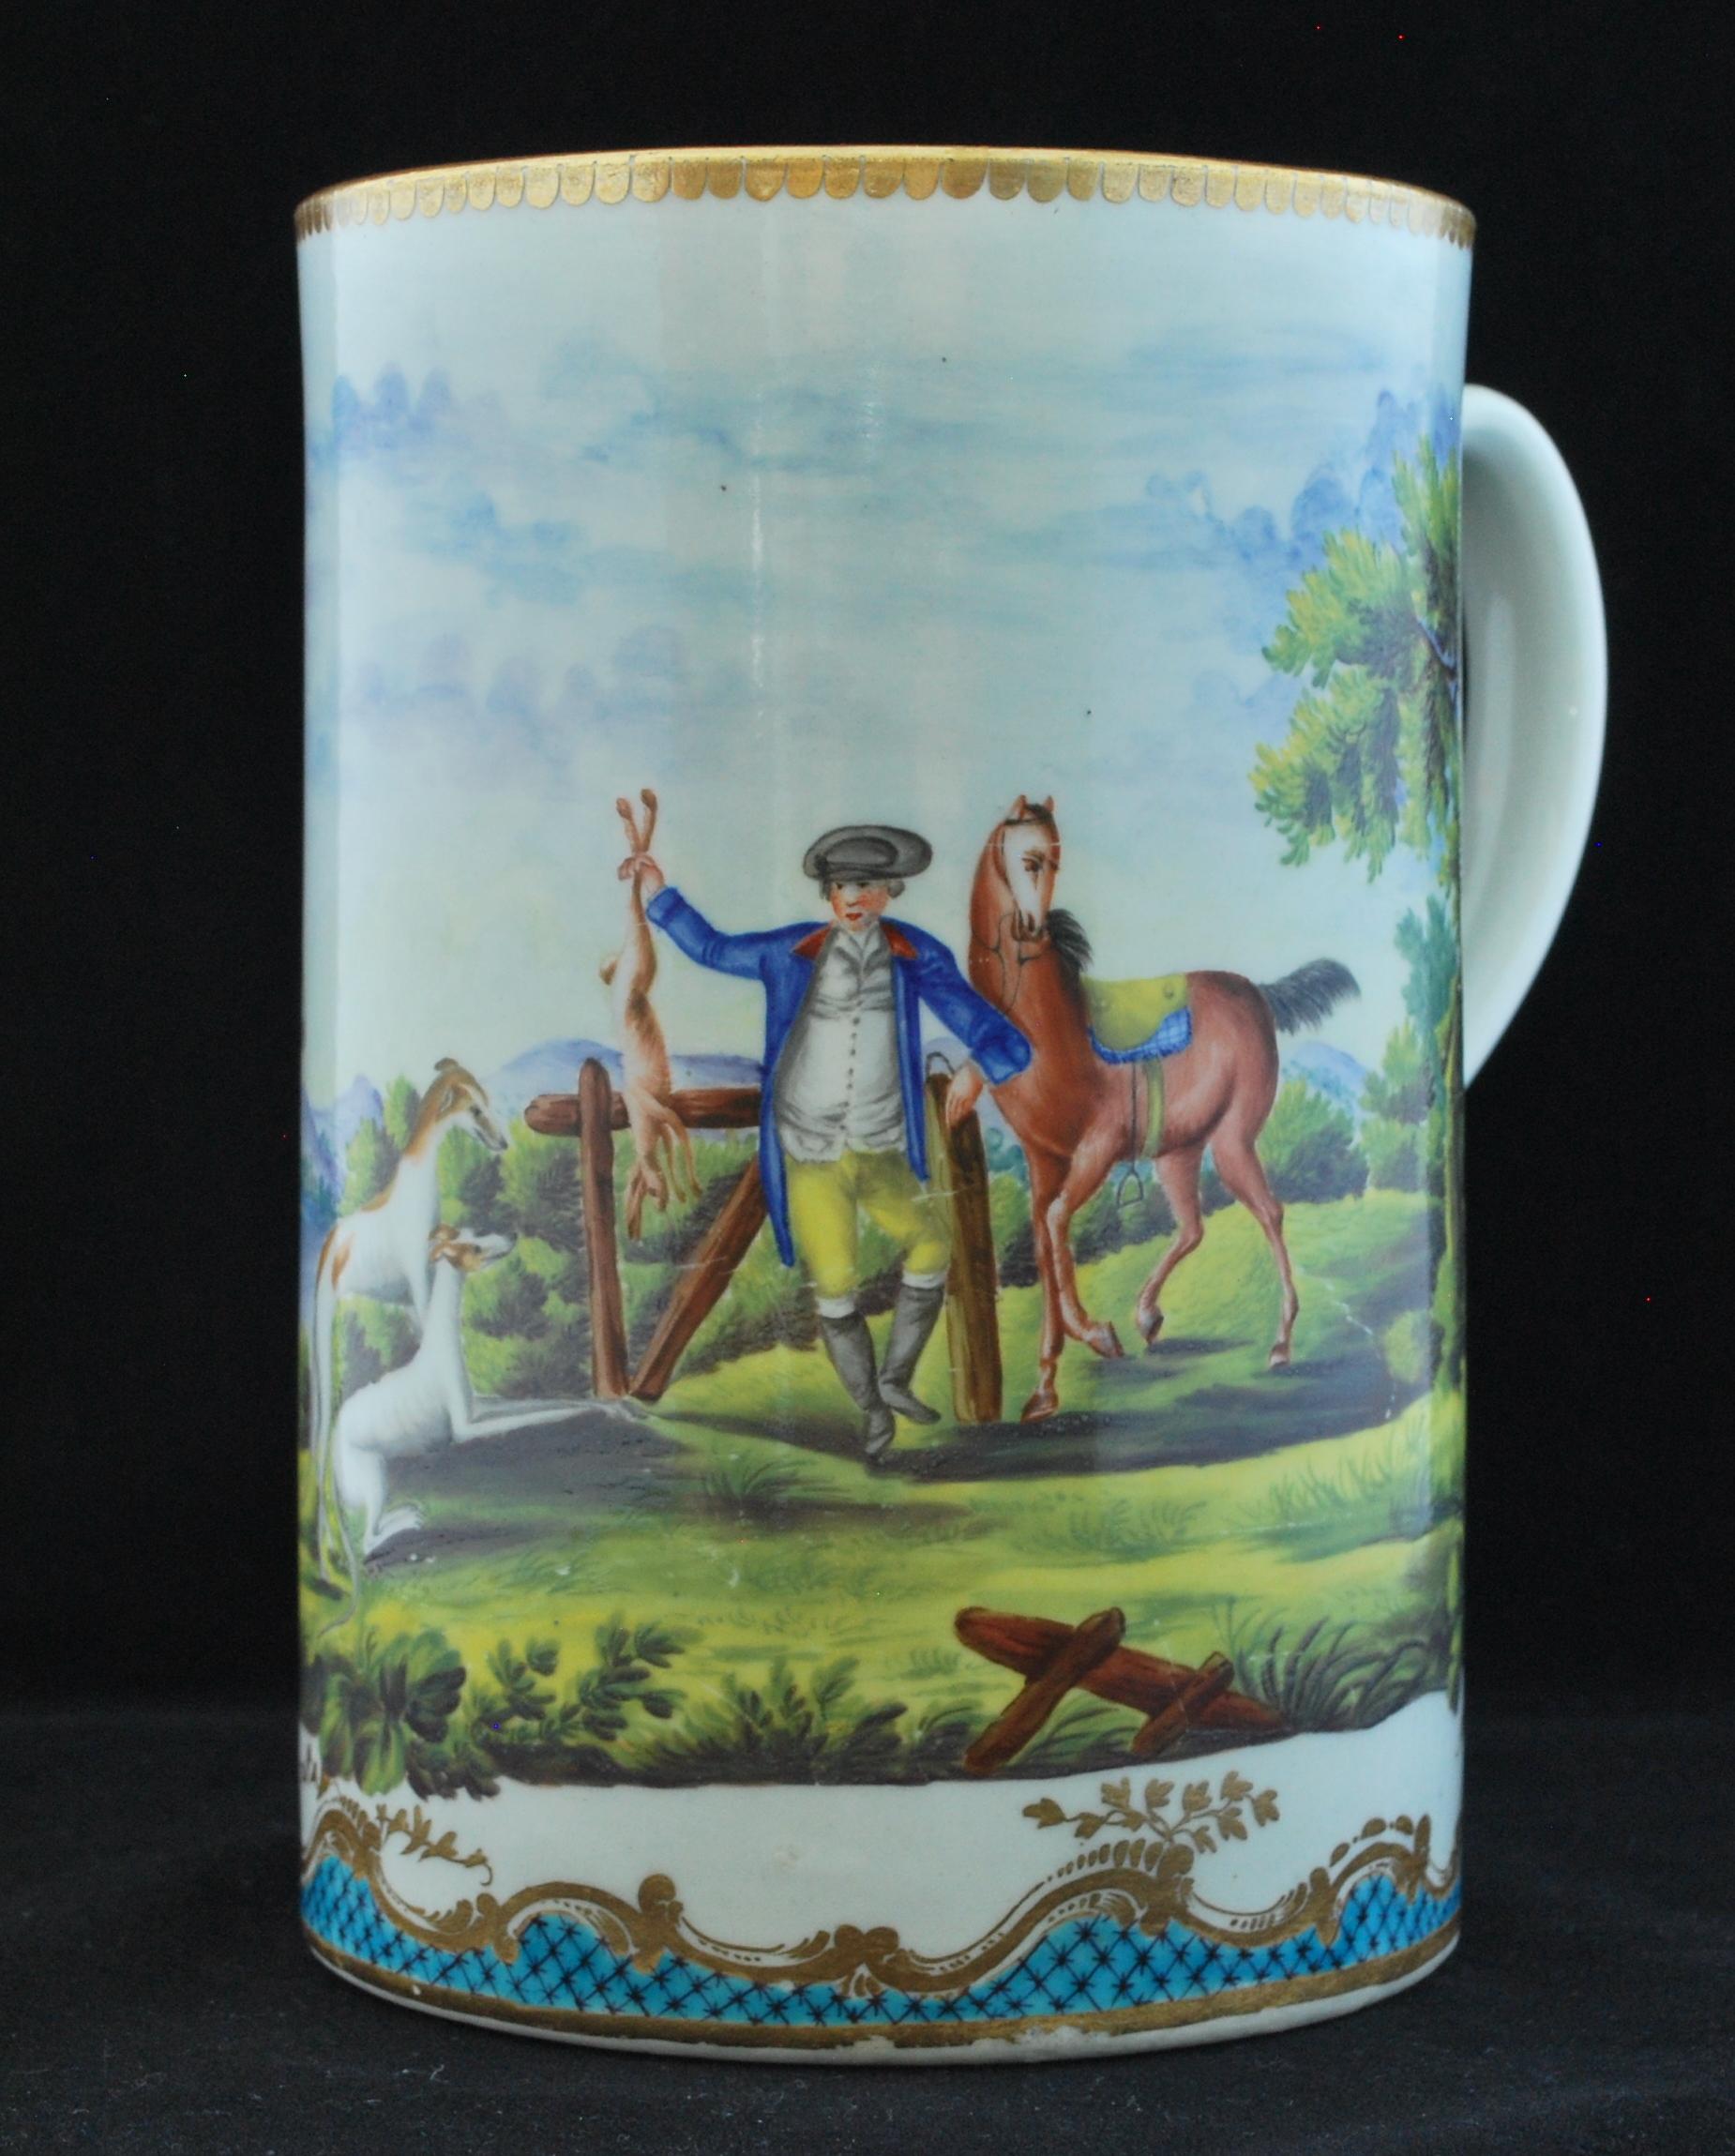 A fine, large 18th century tankard, redecorated in the 19th century with a scene of hare coursing.